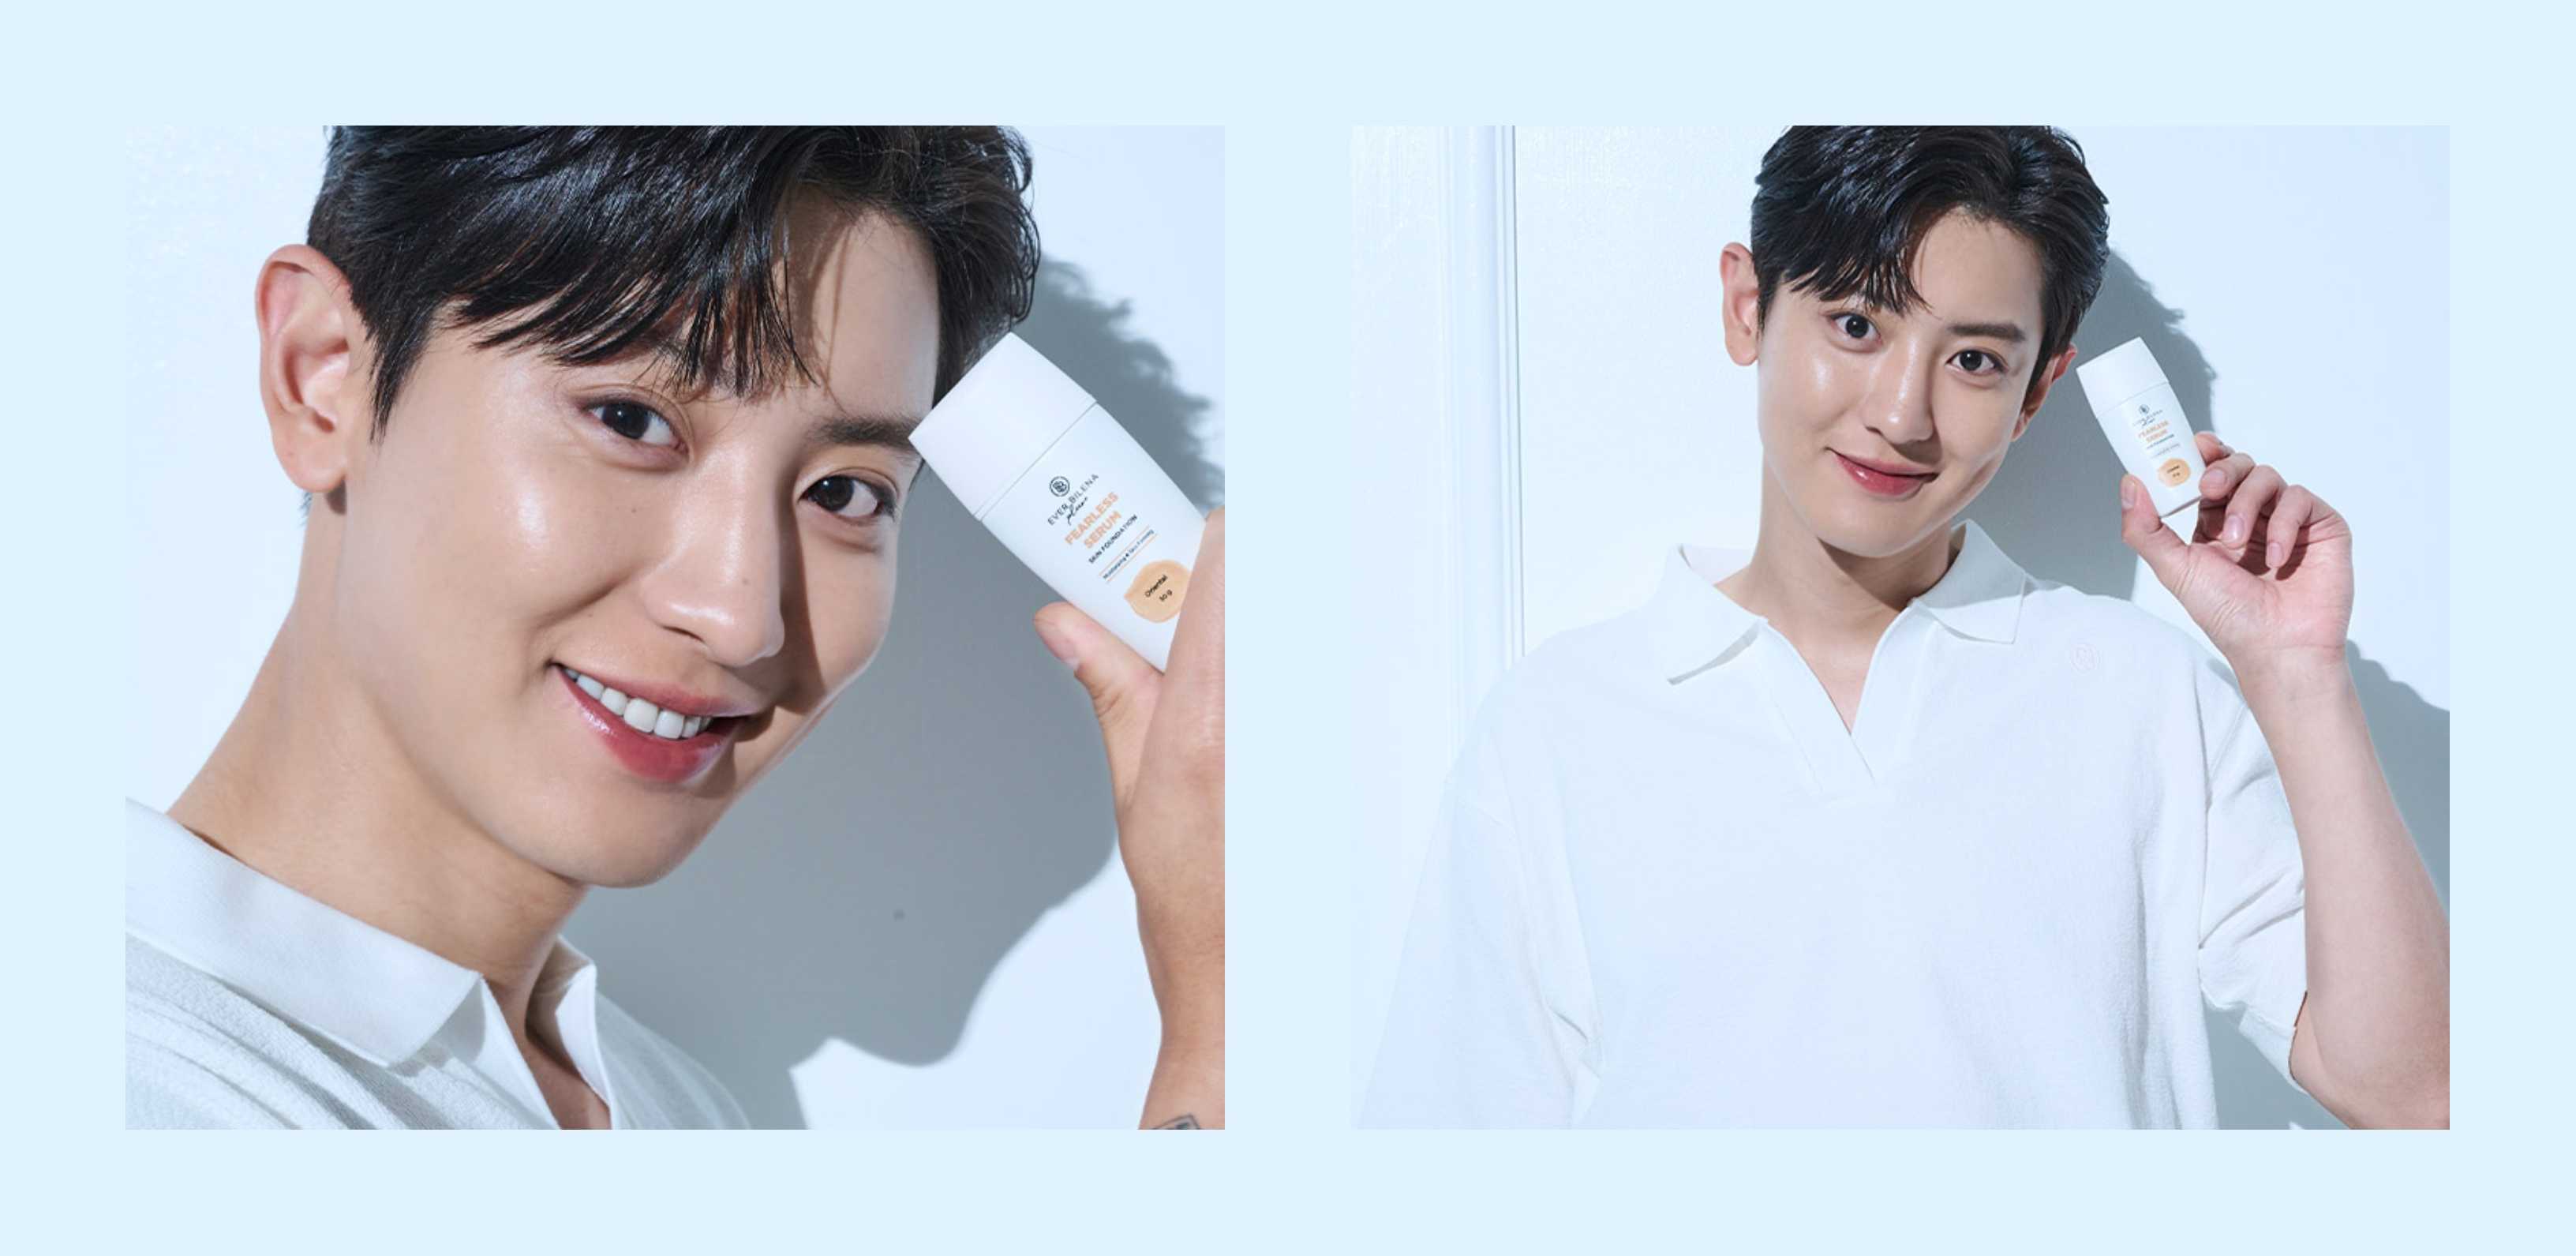 LOOK: EXO's Chanyeol is the new face of Ever Bilena!